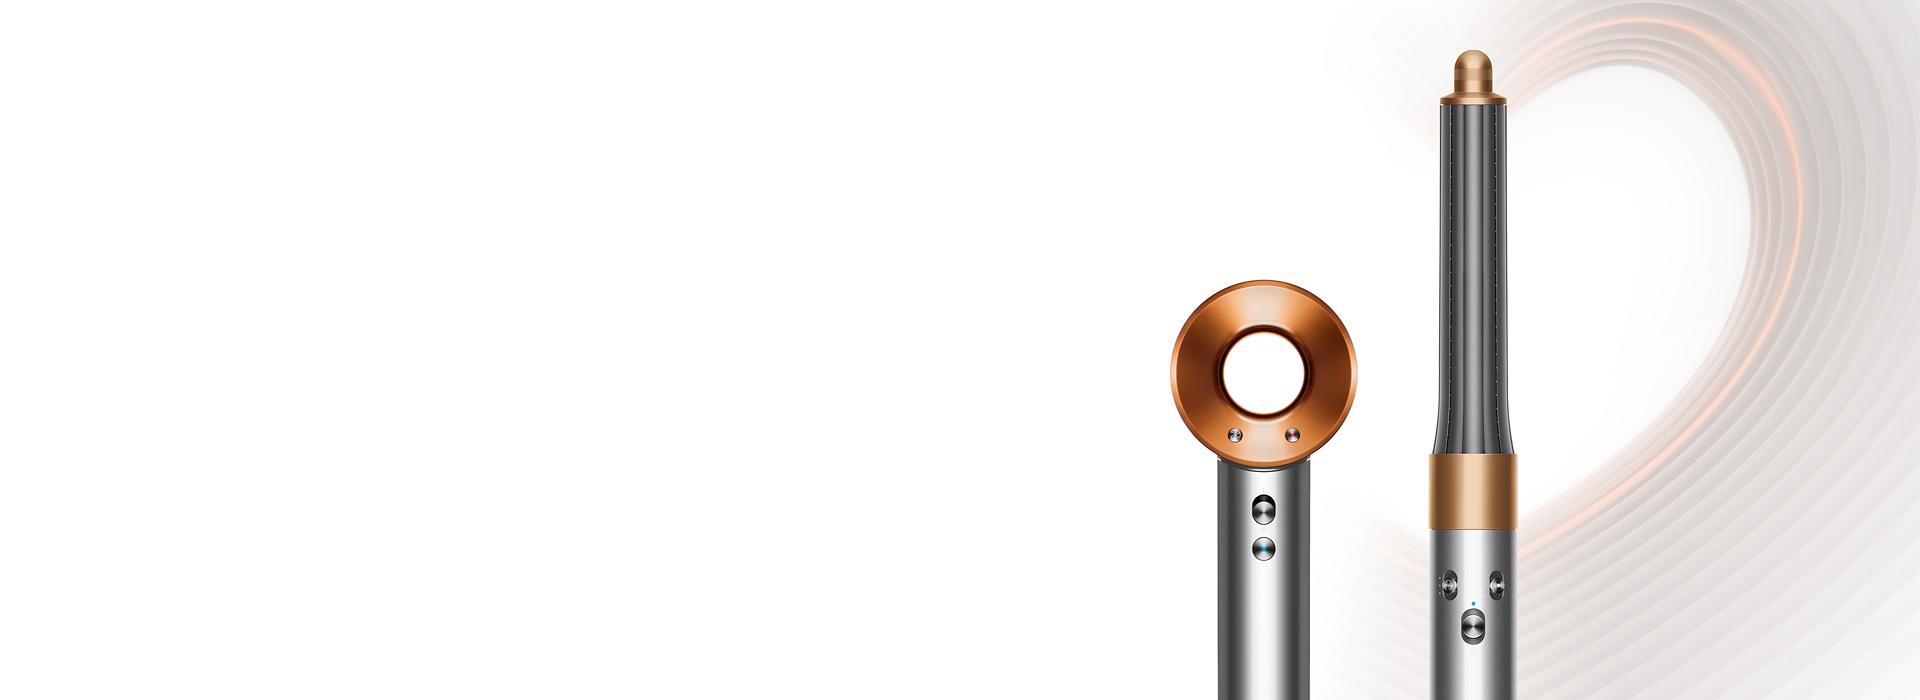 Dyson Supersonic hair dryer and Airwrap multi-styler in Nickel Copper.